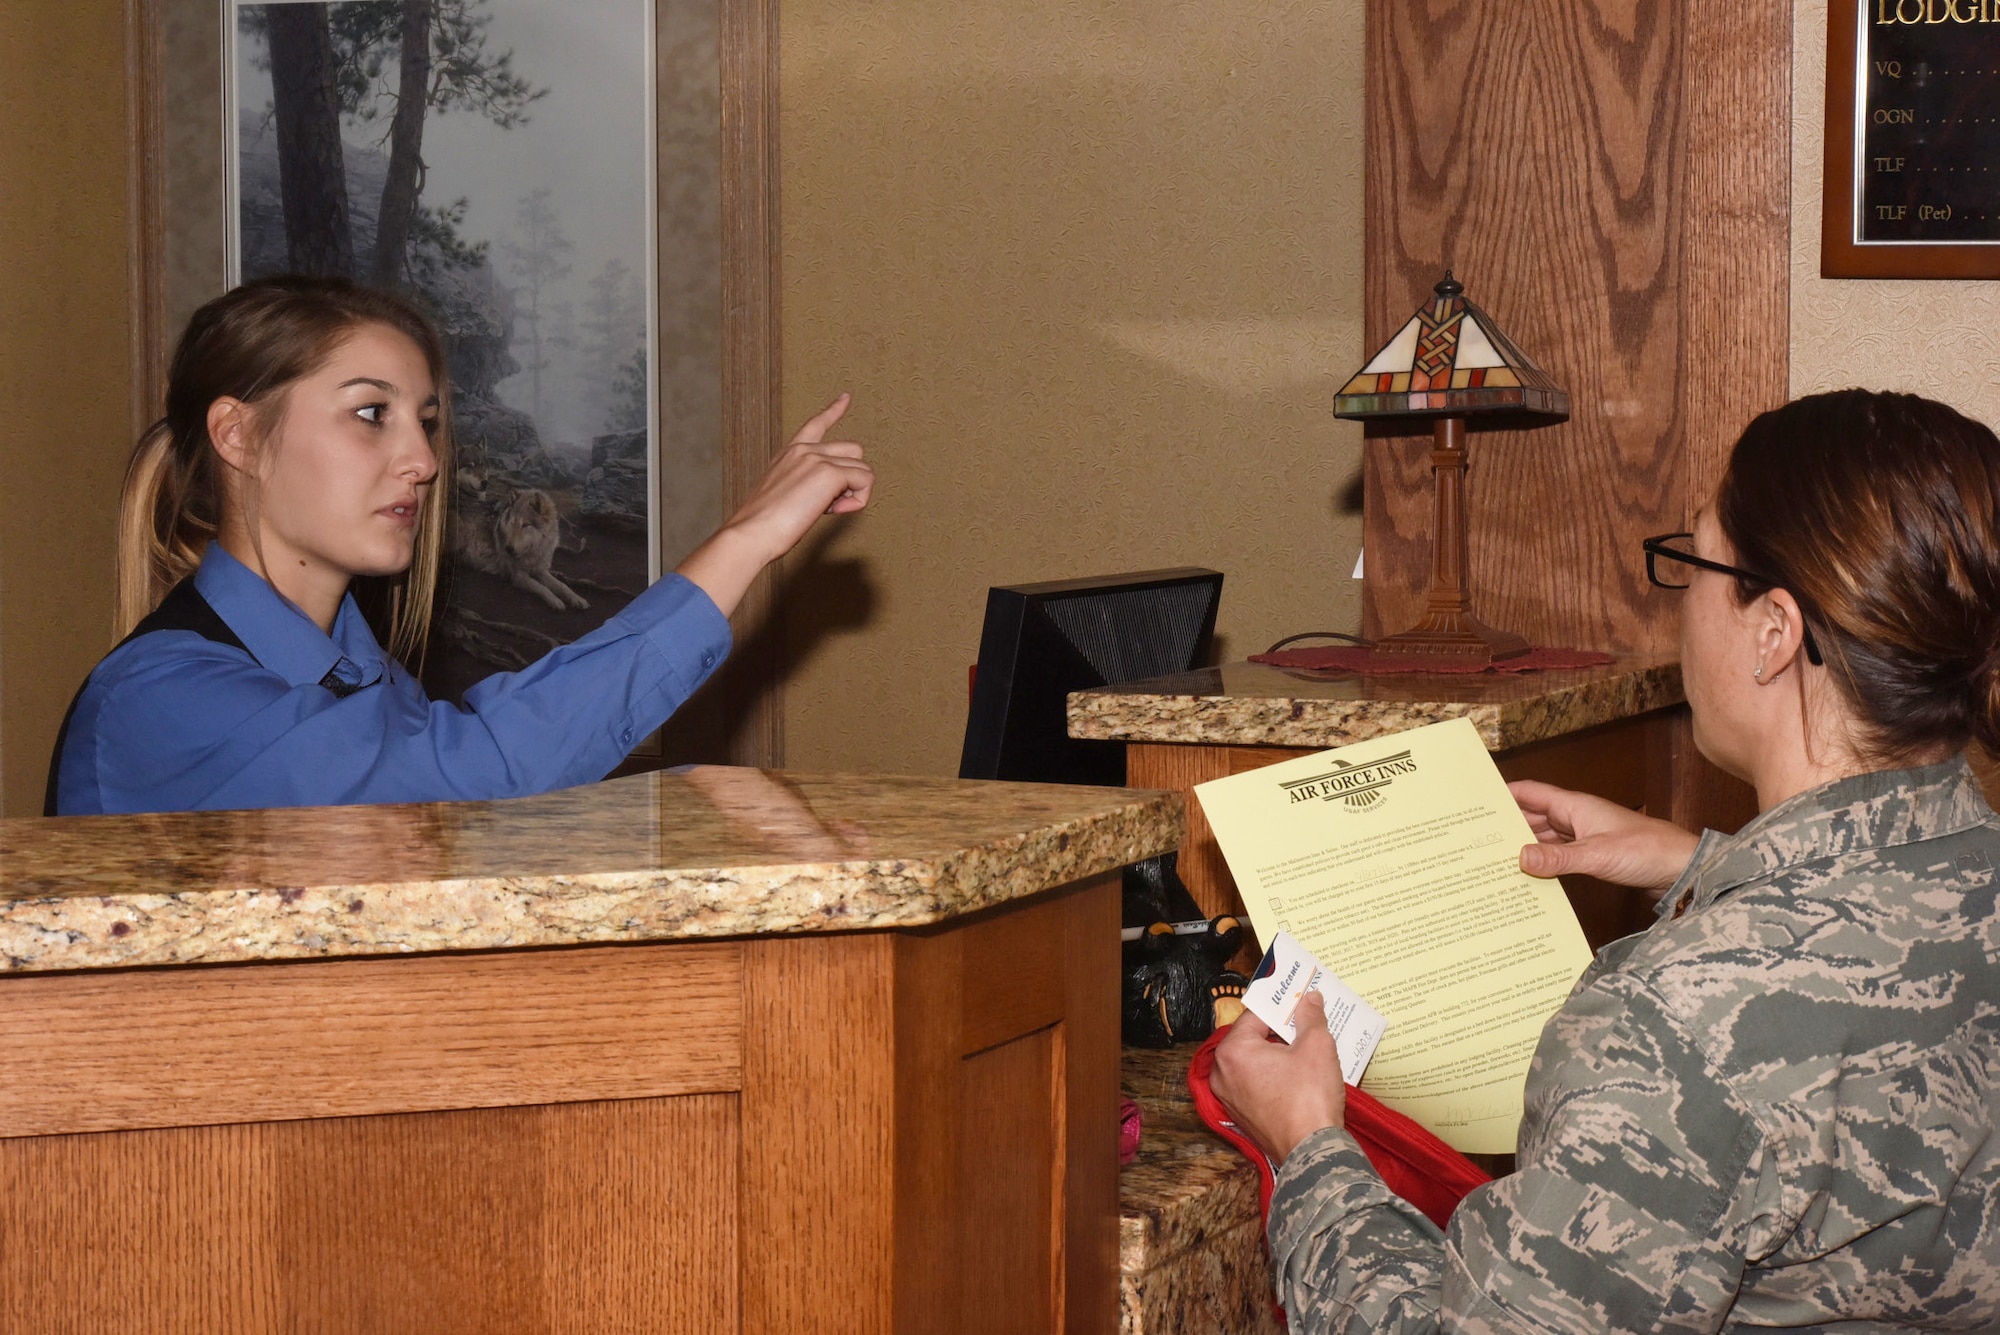 Katelyn Brooks, Malmstrom Inn desk services representative, assists a guest to check in at the inn at Malmstrom Air Force Base, Mont., Sept. 23, 2016.  The 83-room lodging facility has units available for active duty and retired Department of Defense members and their families.  (U.S. Air Force photo/Jason Heavner)  